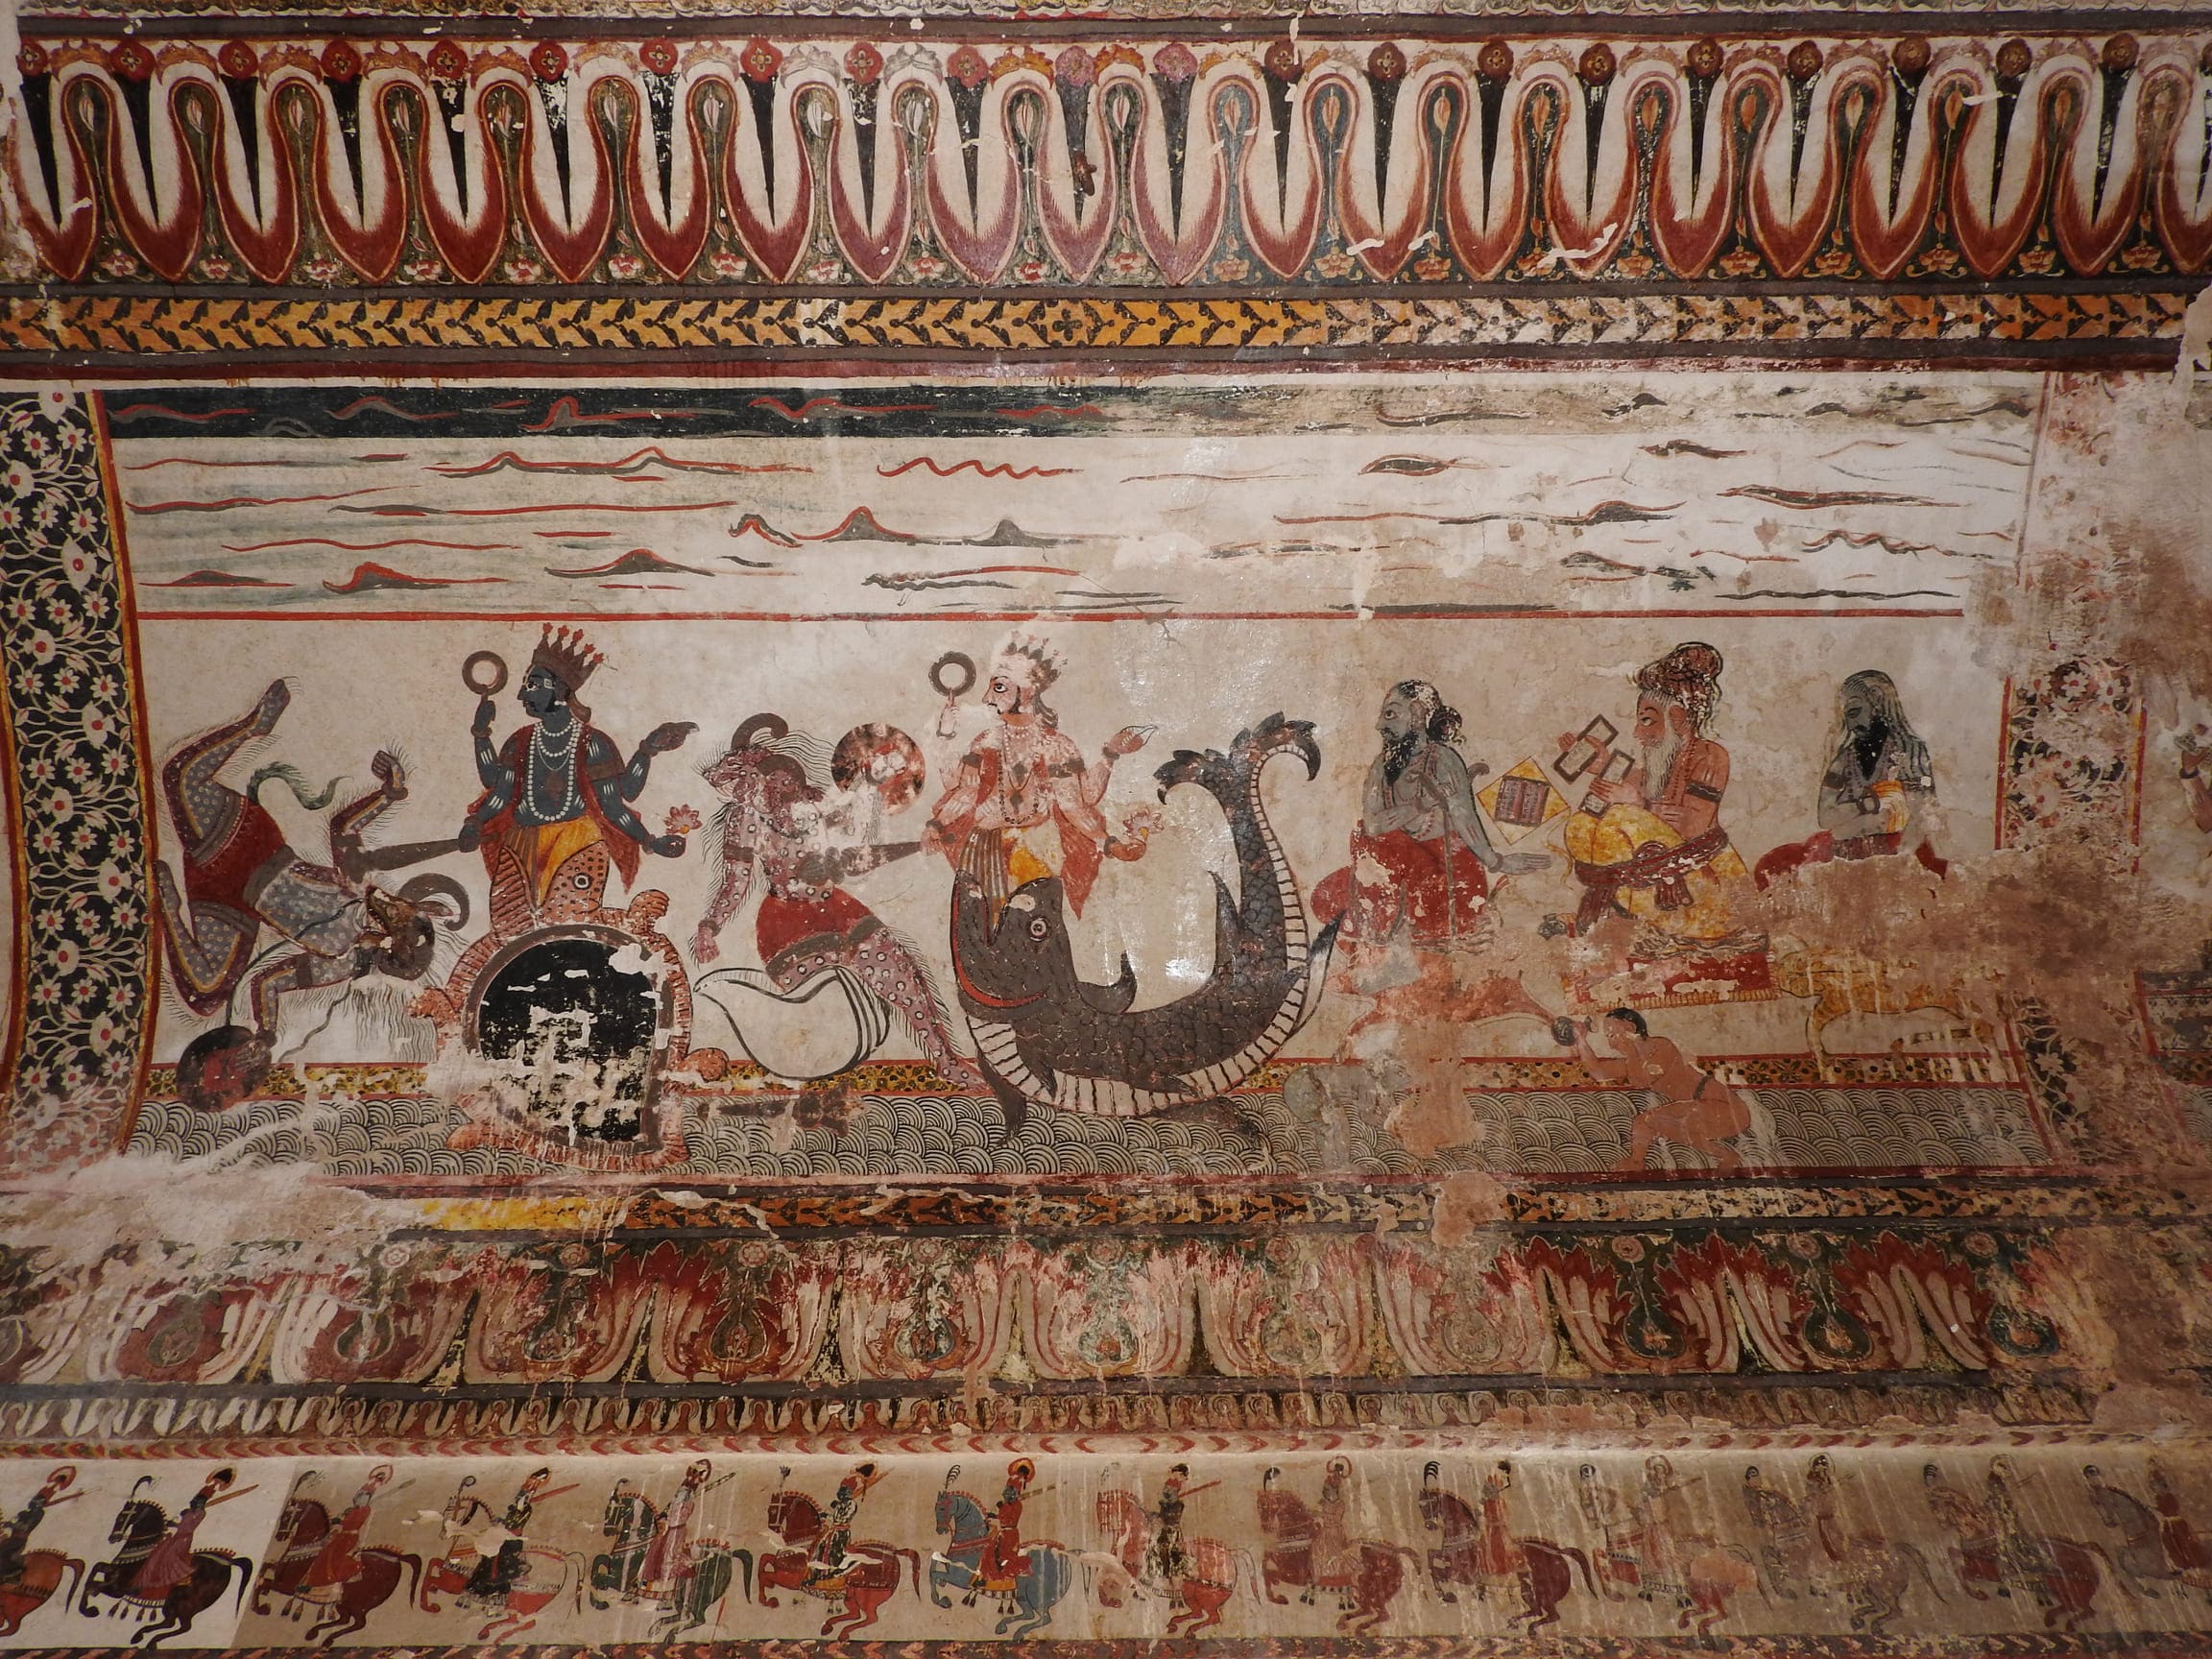 This painting depicts some of the incarnations of Vishnu, for instance his incarnation as a fish. Others include a turtle, a wild boar, and even a buffalo, Orchha 